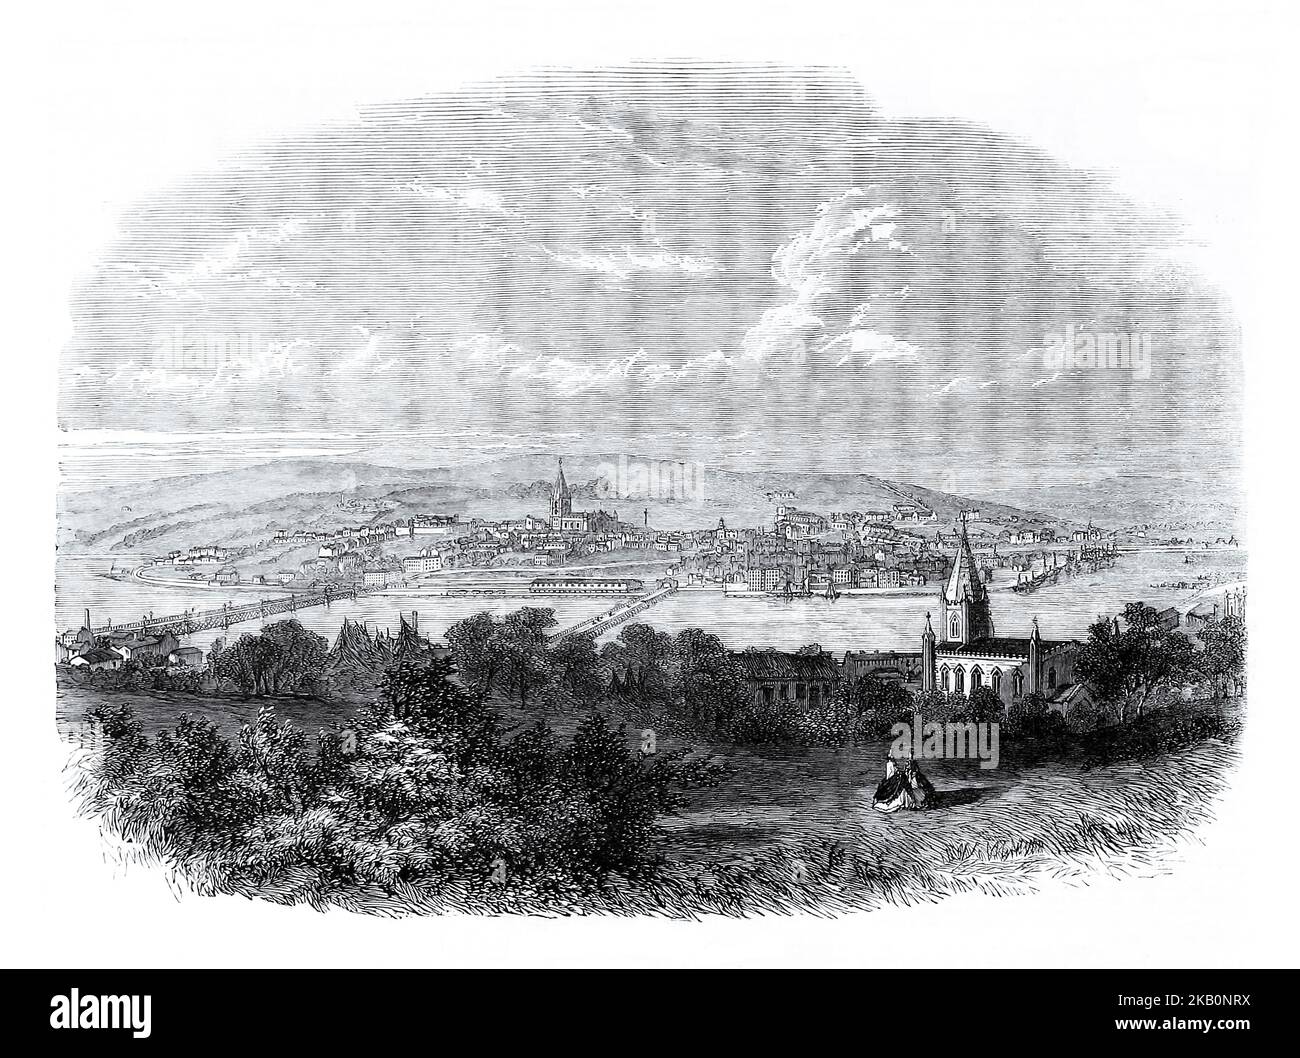 A 19th century view of Derry (aka Londonderry) city from the east bank of the River Foyle. It was rebuilt in the 18th century with many fine Georgian houses. The city's first bridge across the River Foyle was built in 1790. During the 18th and 19th centuries the port became an important embarkation point for Irish emigrants setting out for North America. Stock Photo